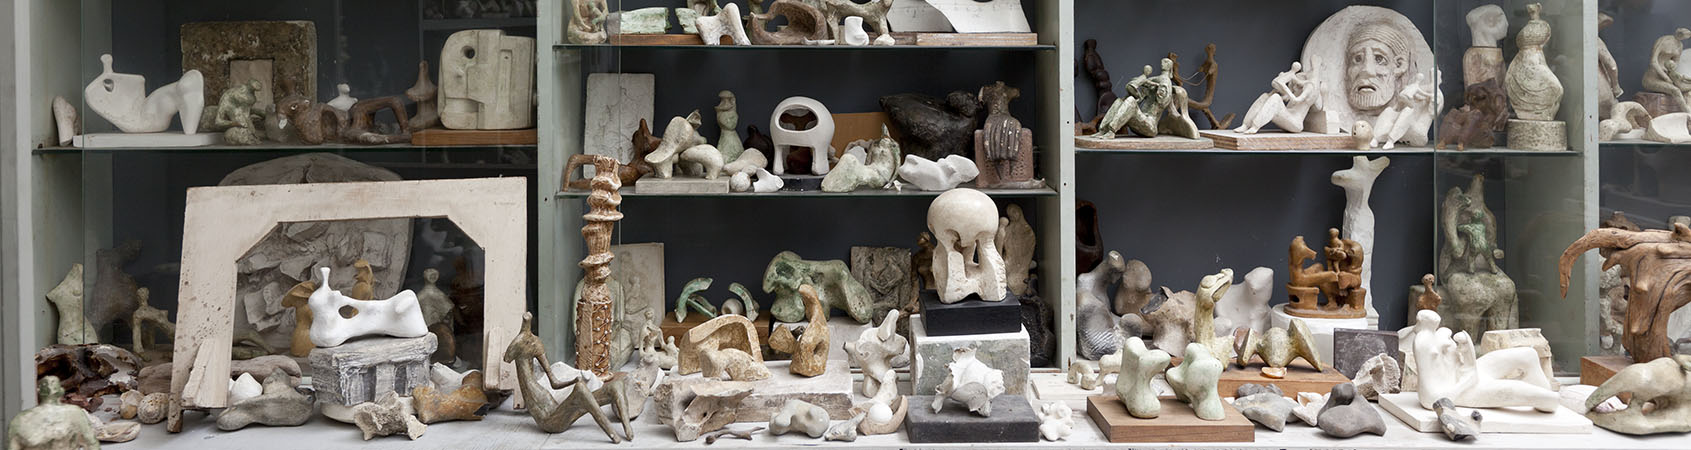 Plaster maquettes arranged on shelves in Henry Moore's Bourne Maquette Studio, Perry Green. For more details click here. photo: Jonty Wilde